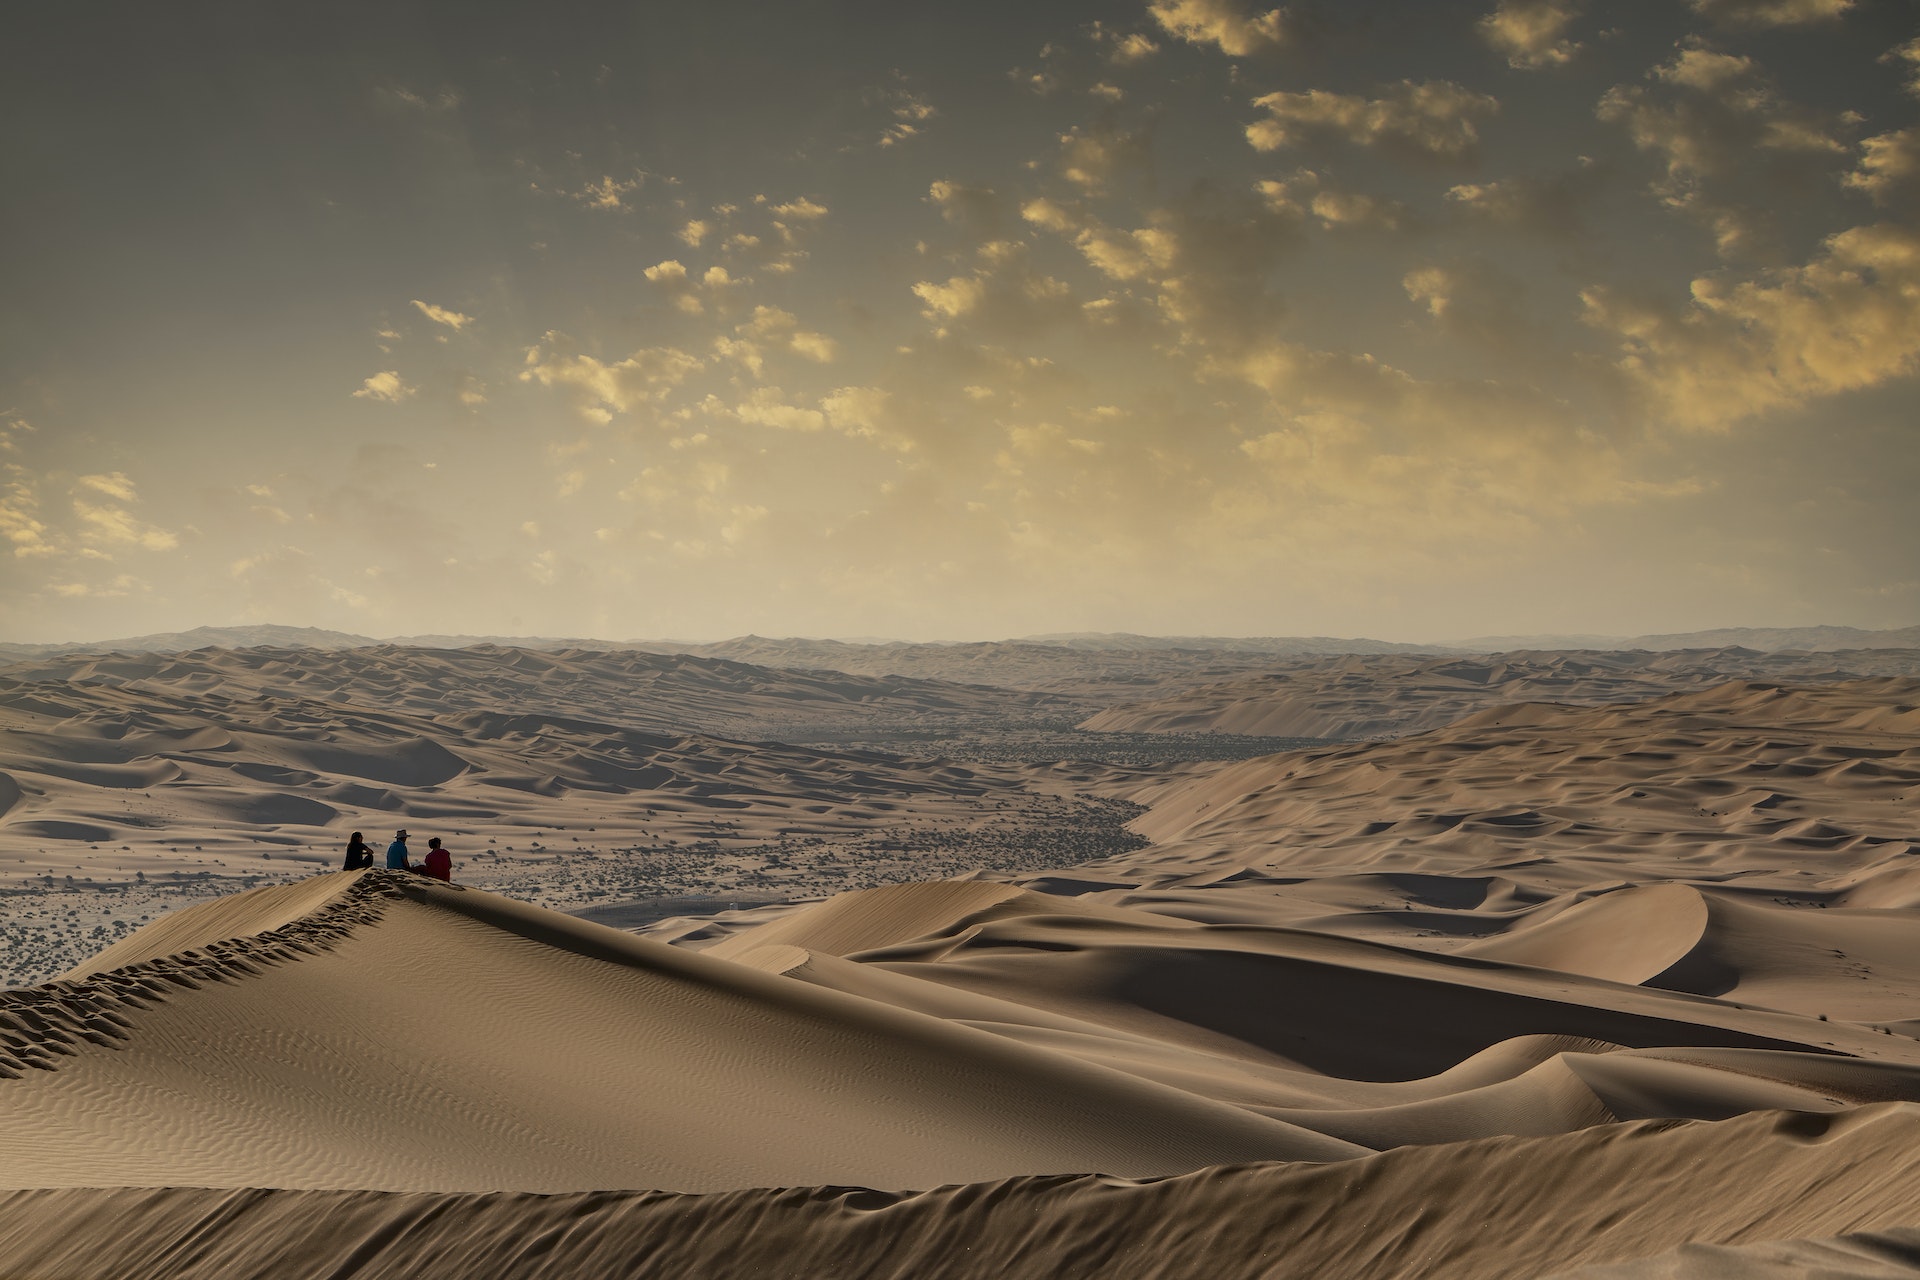 A family sitting on the top of a giant sand dune in the desert watching the sunset in the Empty Quarter, or Rub al Khali, the world's largest sand desert